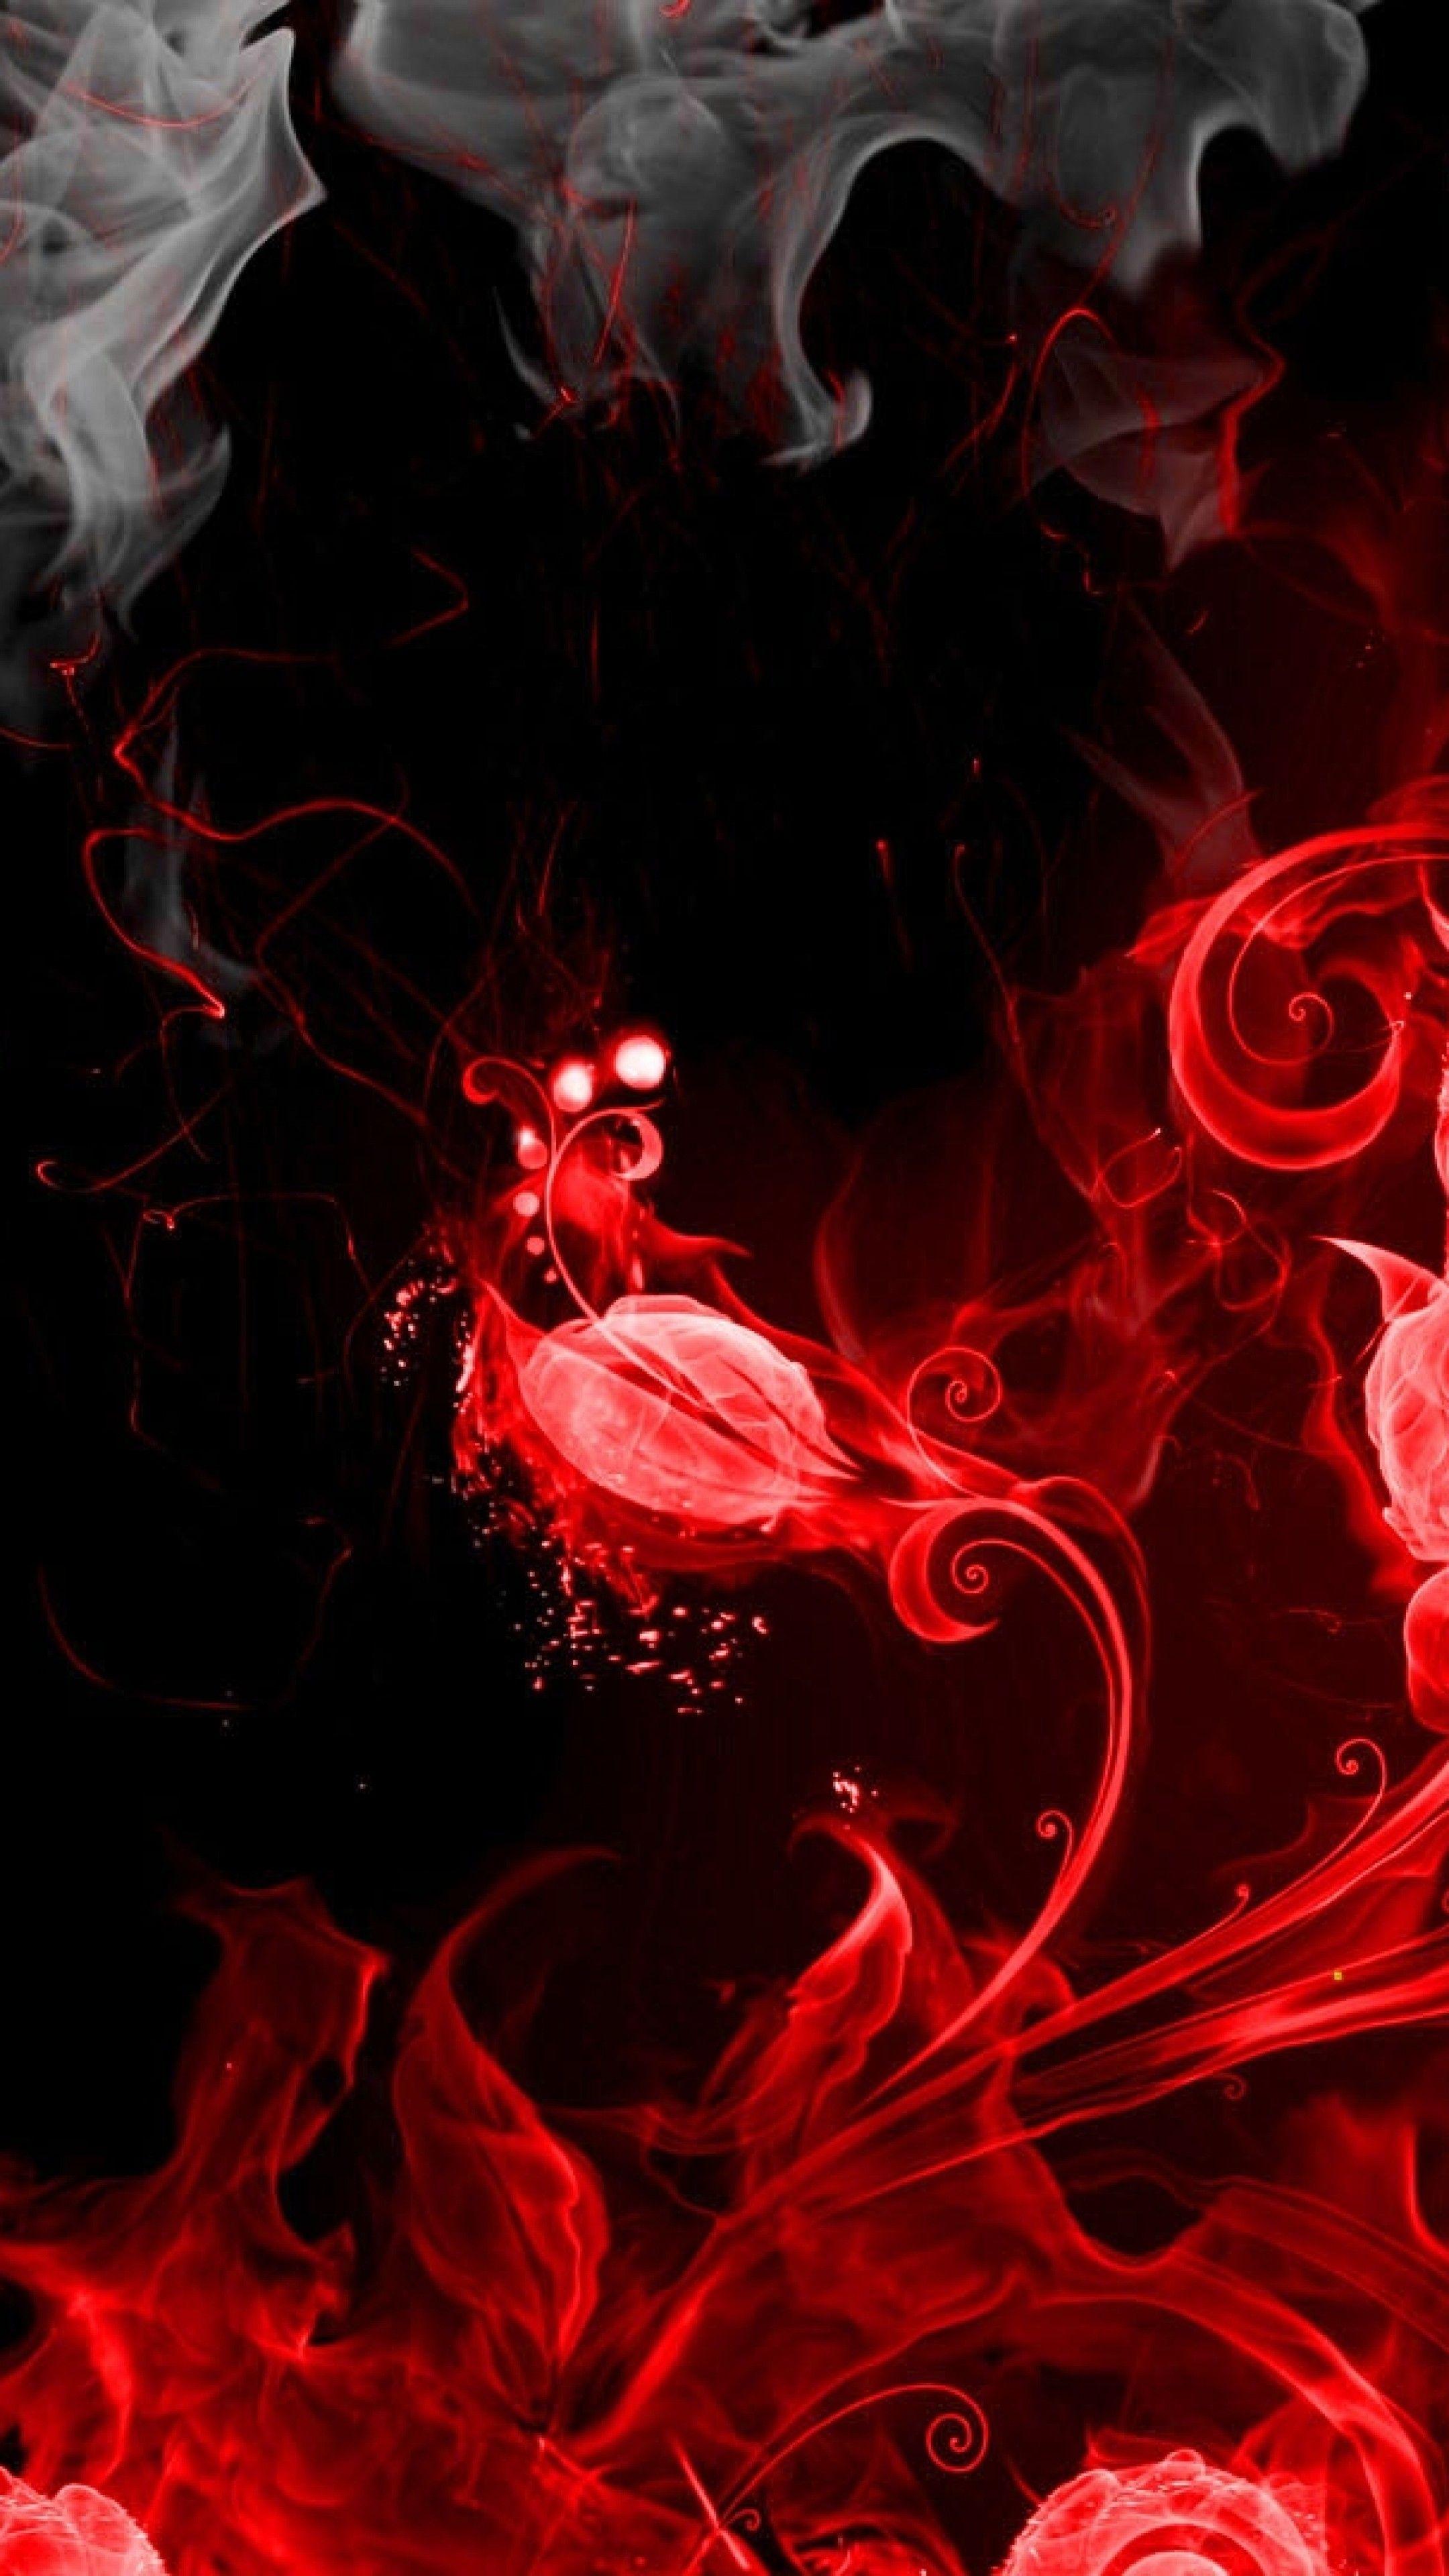 Red And Black Phone Wallpapers Top Free Red And Black Phone